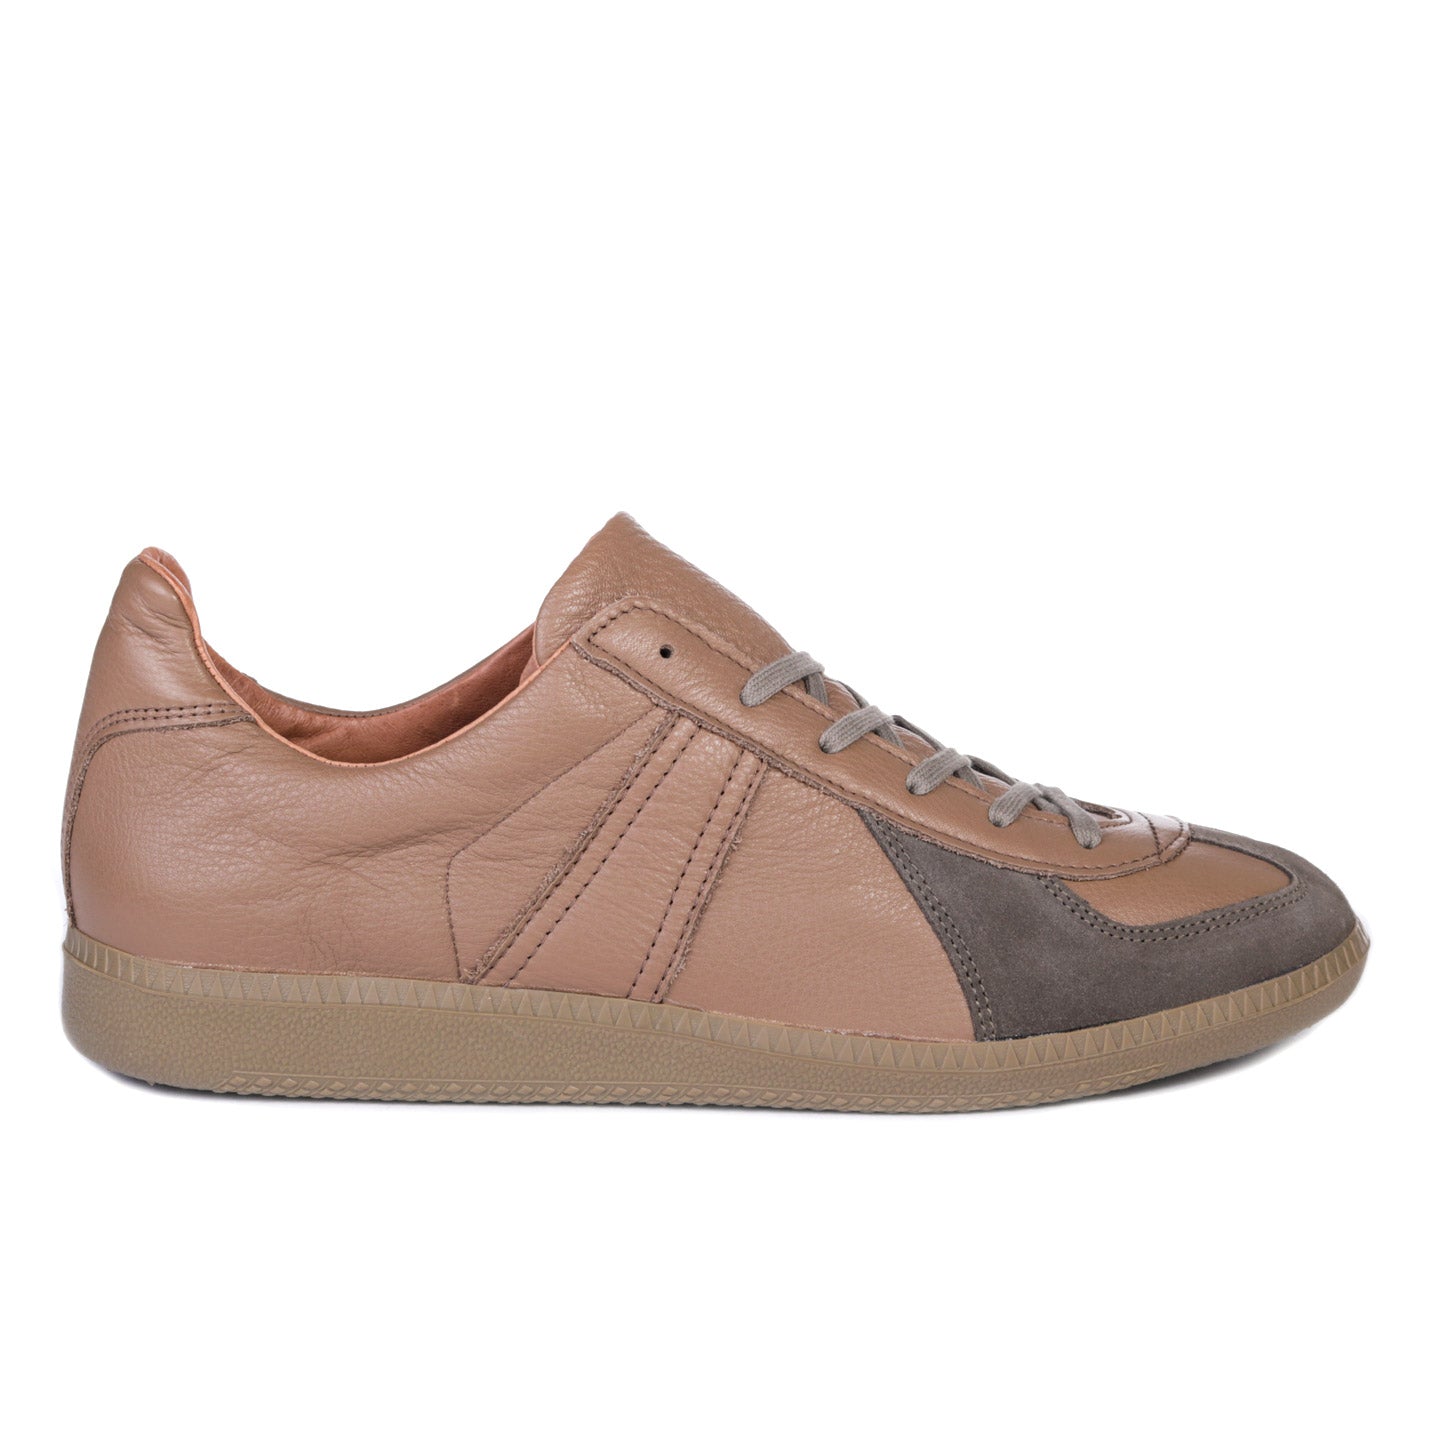 REPRODUCTION OF FOUND GERMAN MILITARY TRAINER DARK BEIGE